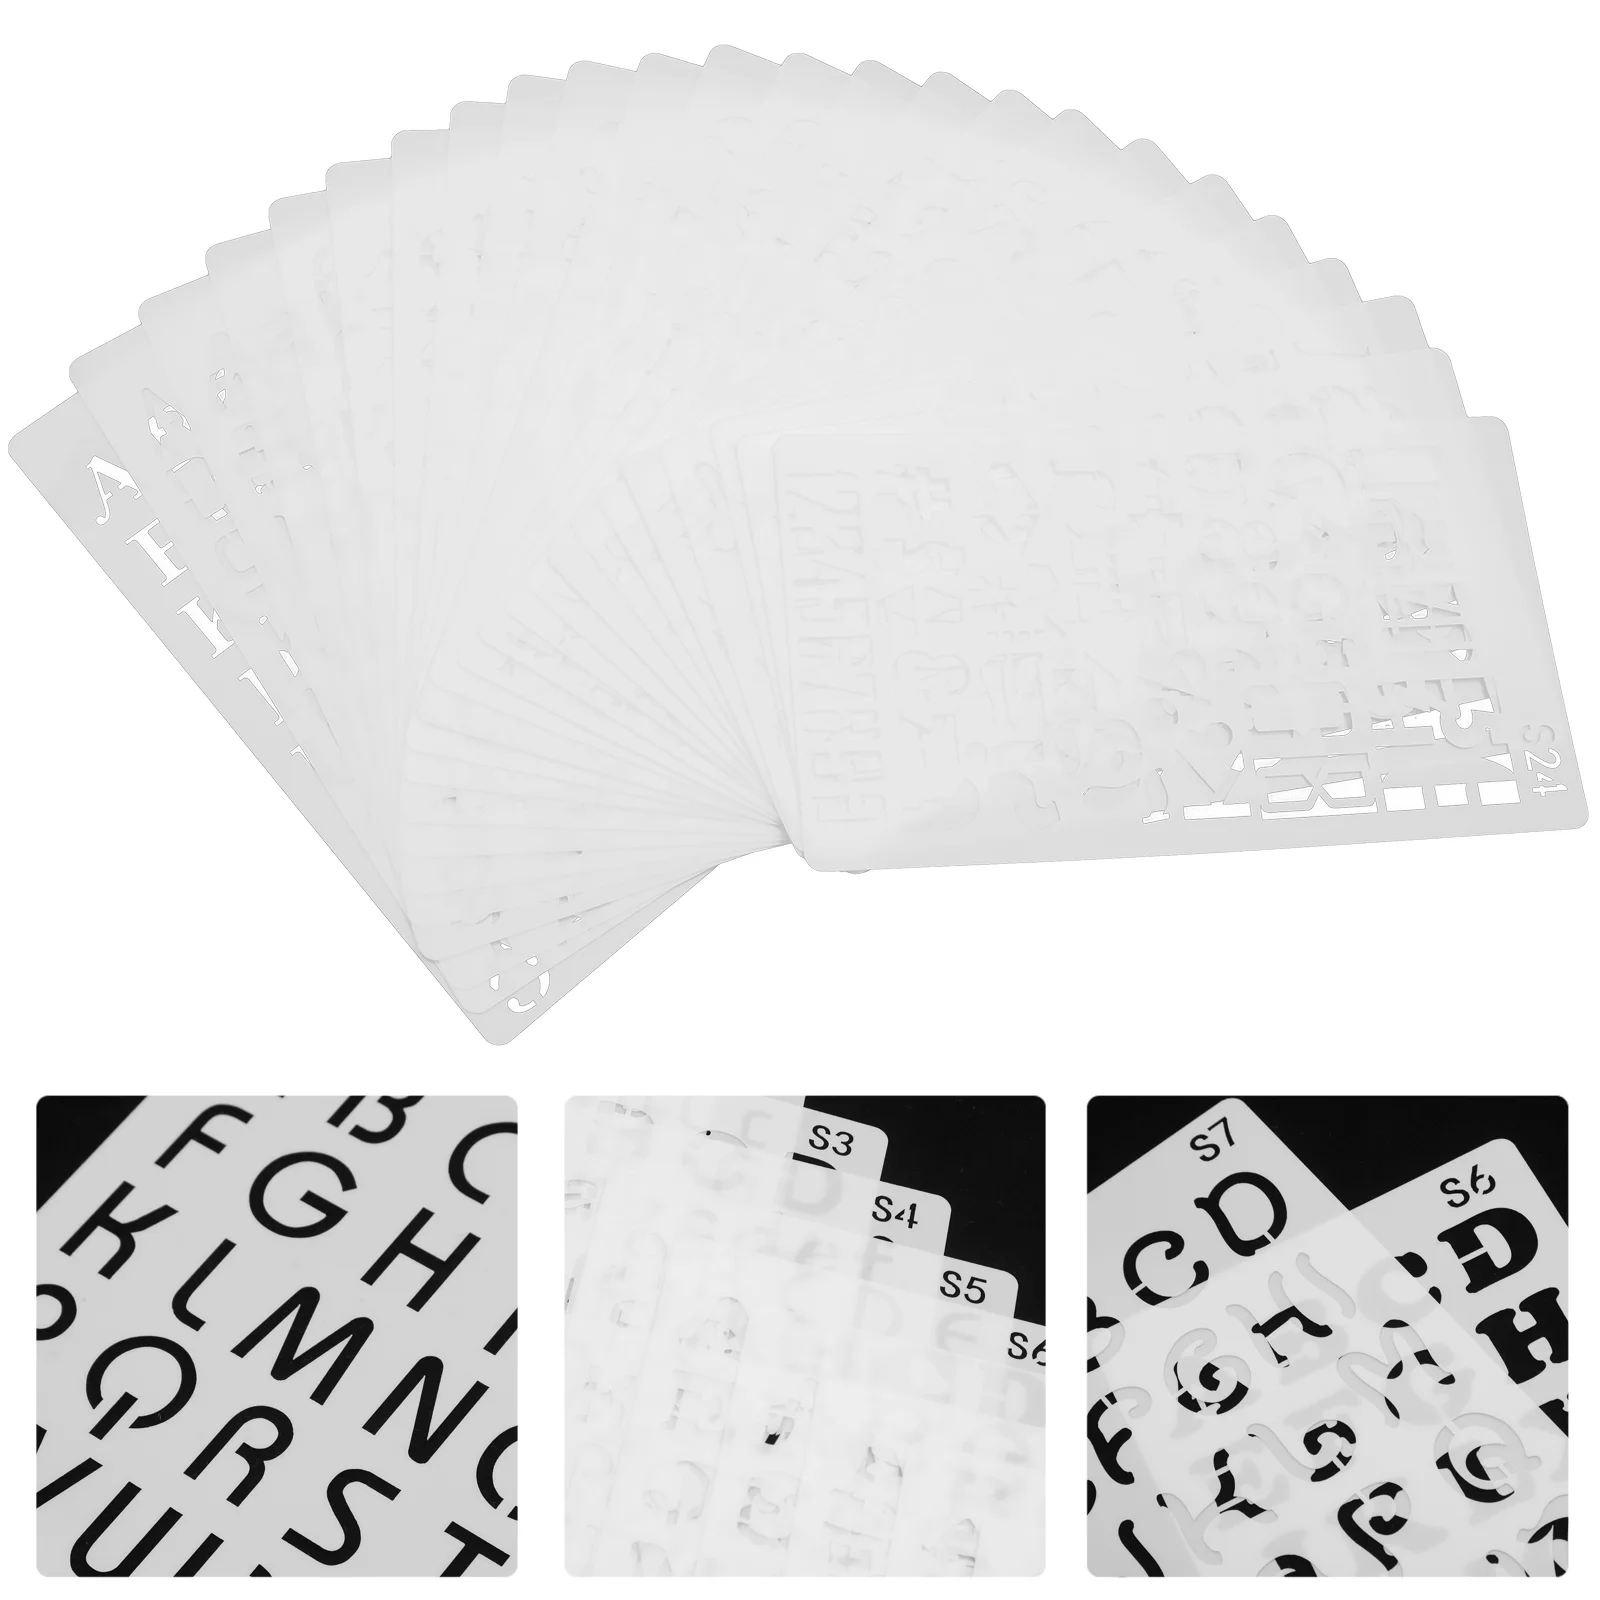 

24Pcs Alphabet Letter Painting Template Stencil Drawing Template Set for Diary, Scrapbook, Design, DIY Craft Projects